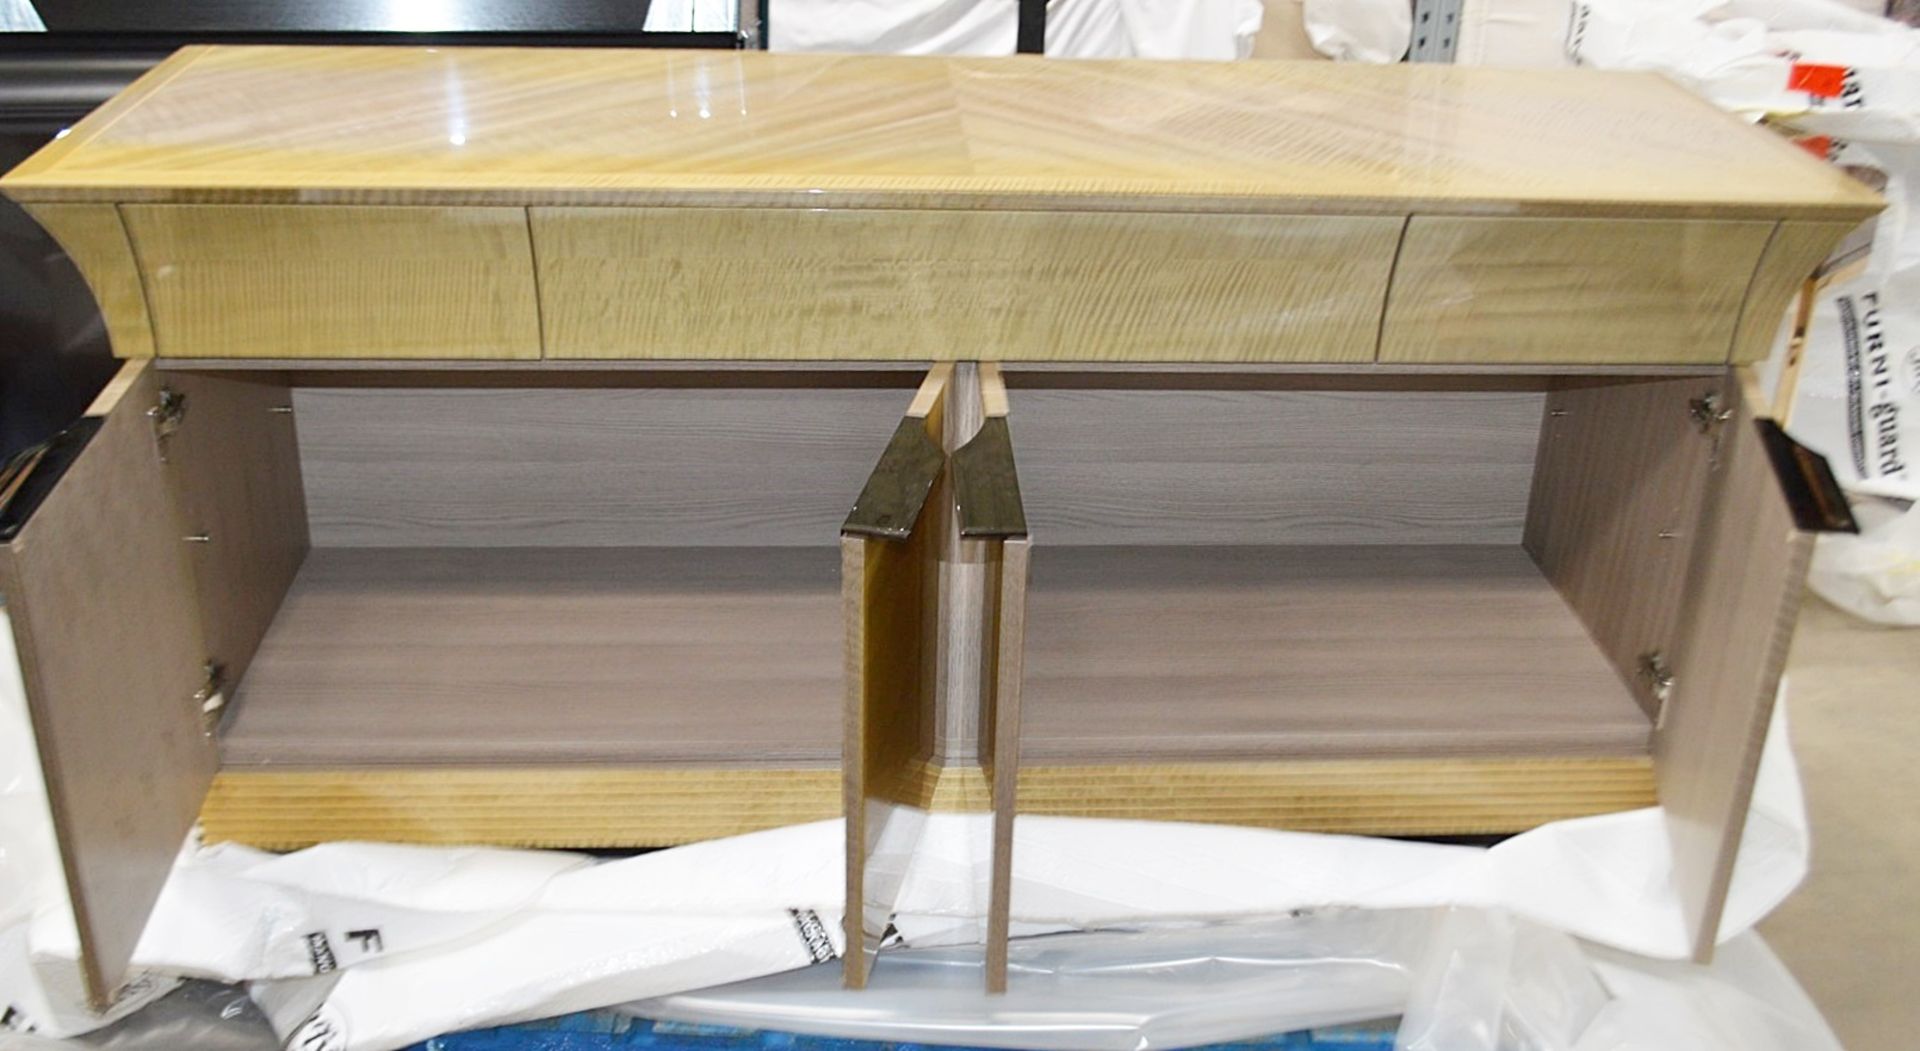 1 x GIORGIO COLLECTION 'Alchemy' Buffet / Sideboard Unit (Model: 6810/80) - Original RRP £3,495 - Image 7 of 8